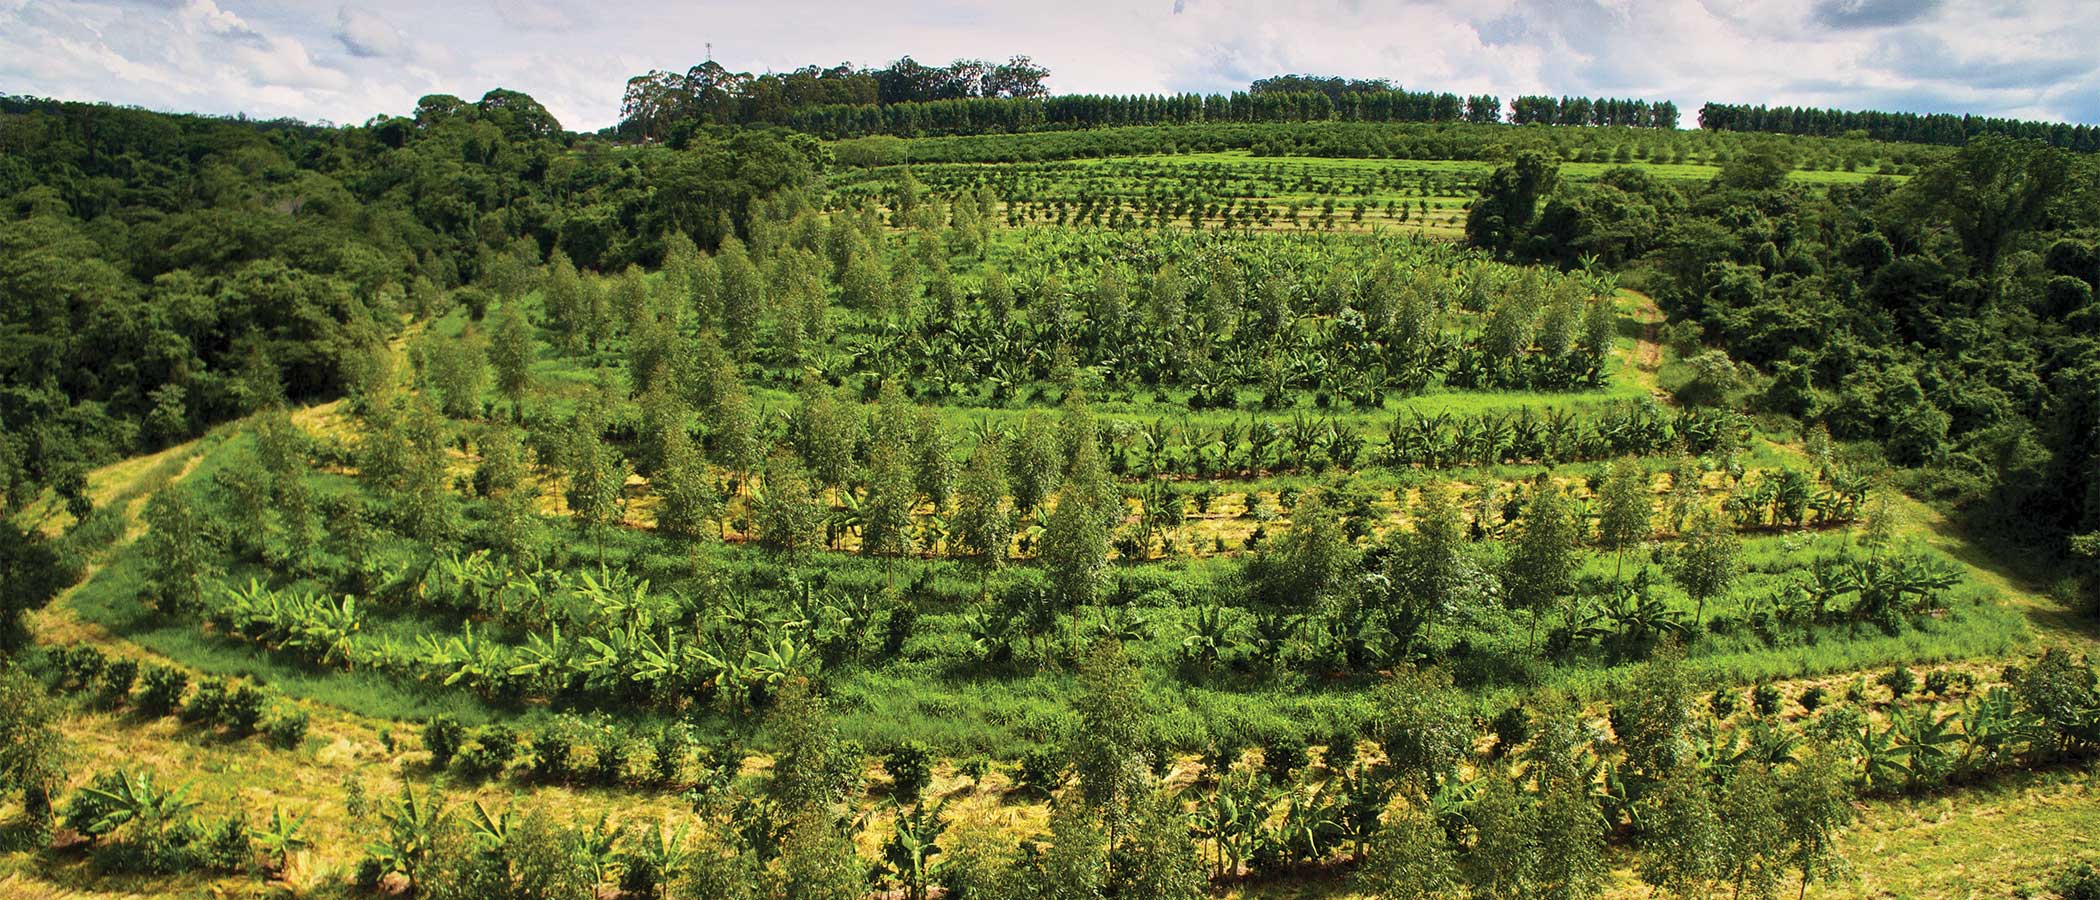 Hillside of a farm employing regenerative farming and agroforestry practices.